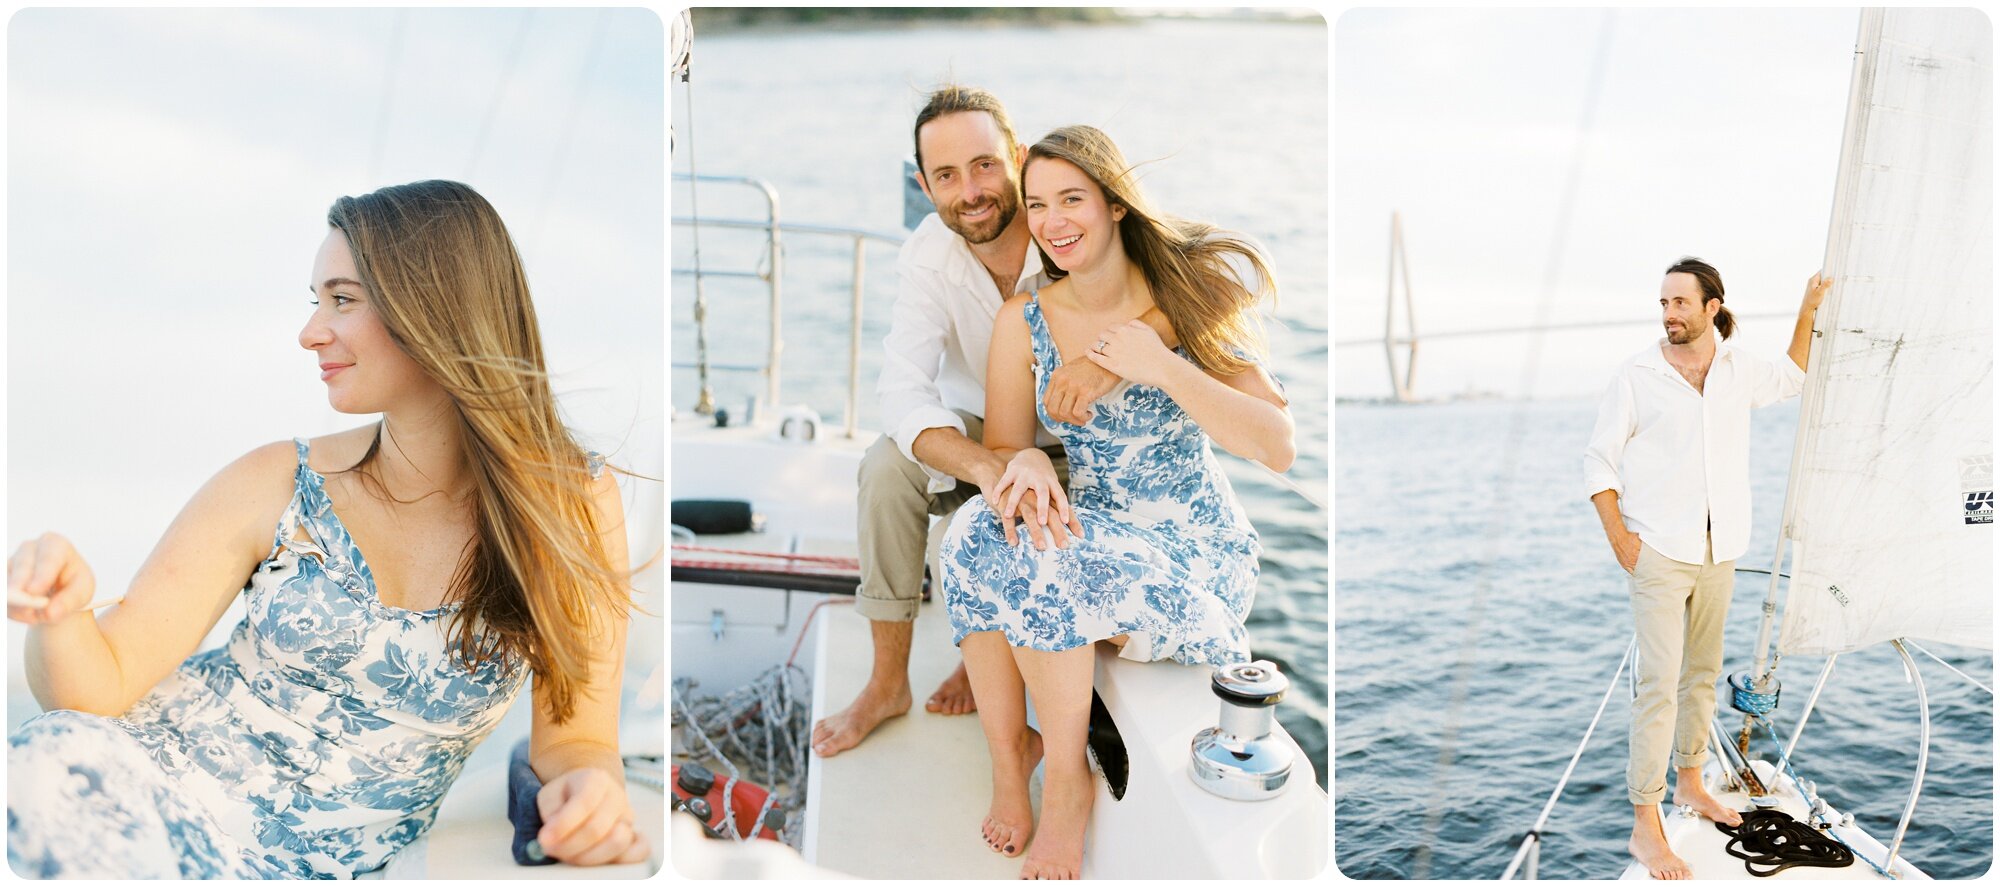 outdoor_sailboat_engagement_session_sunset_sail_kailee_dimeglio_photography_0012.jpg